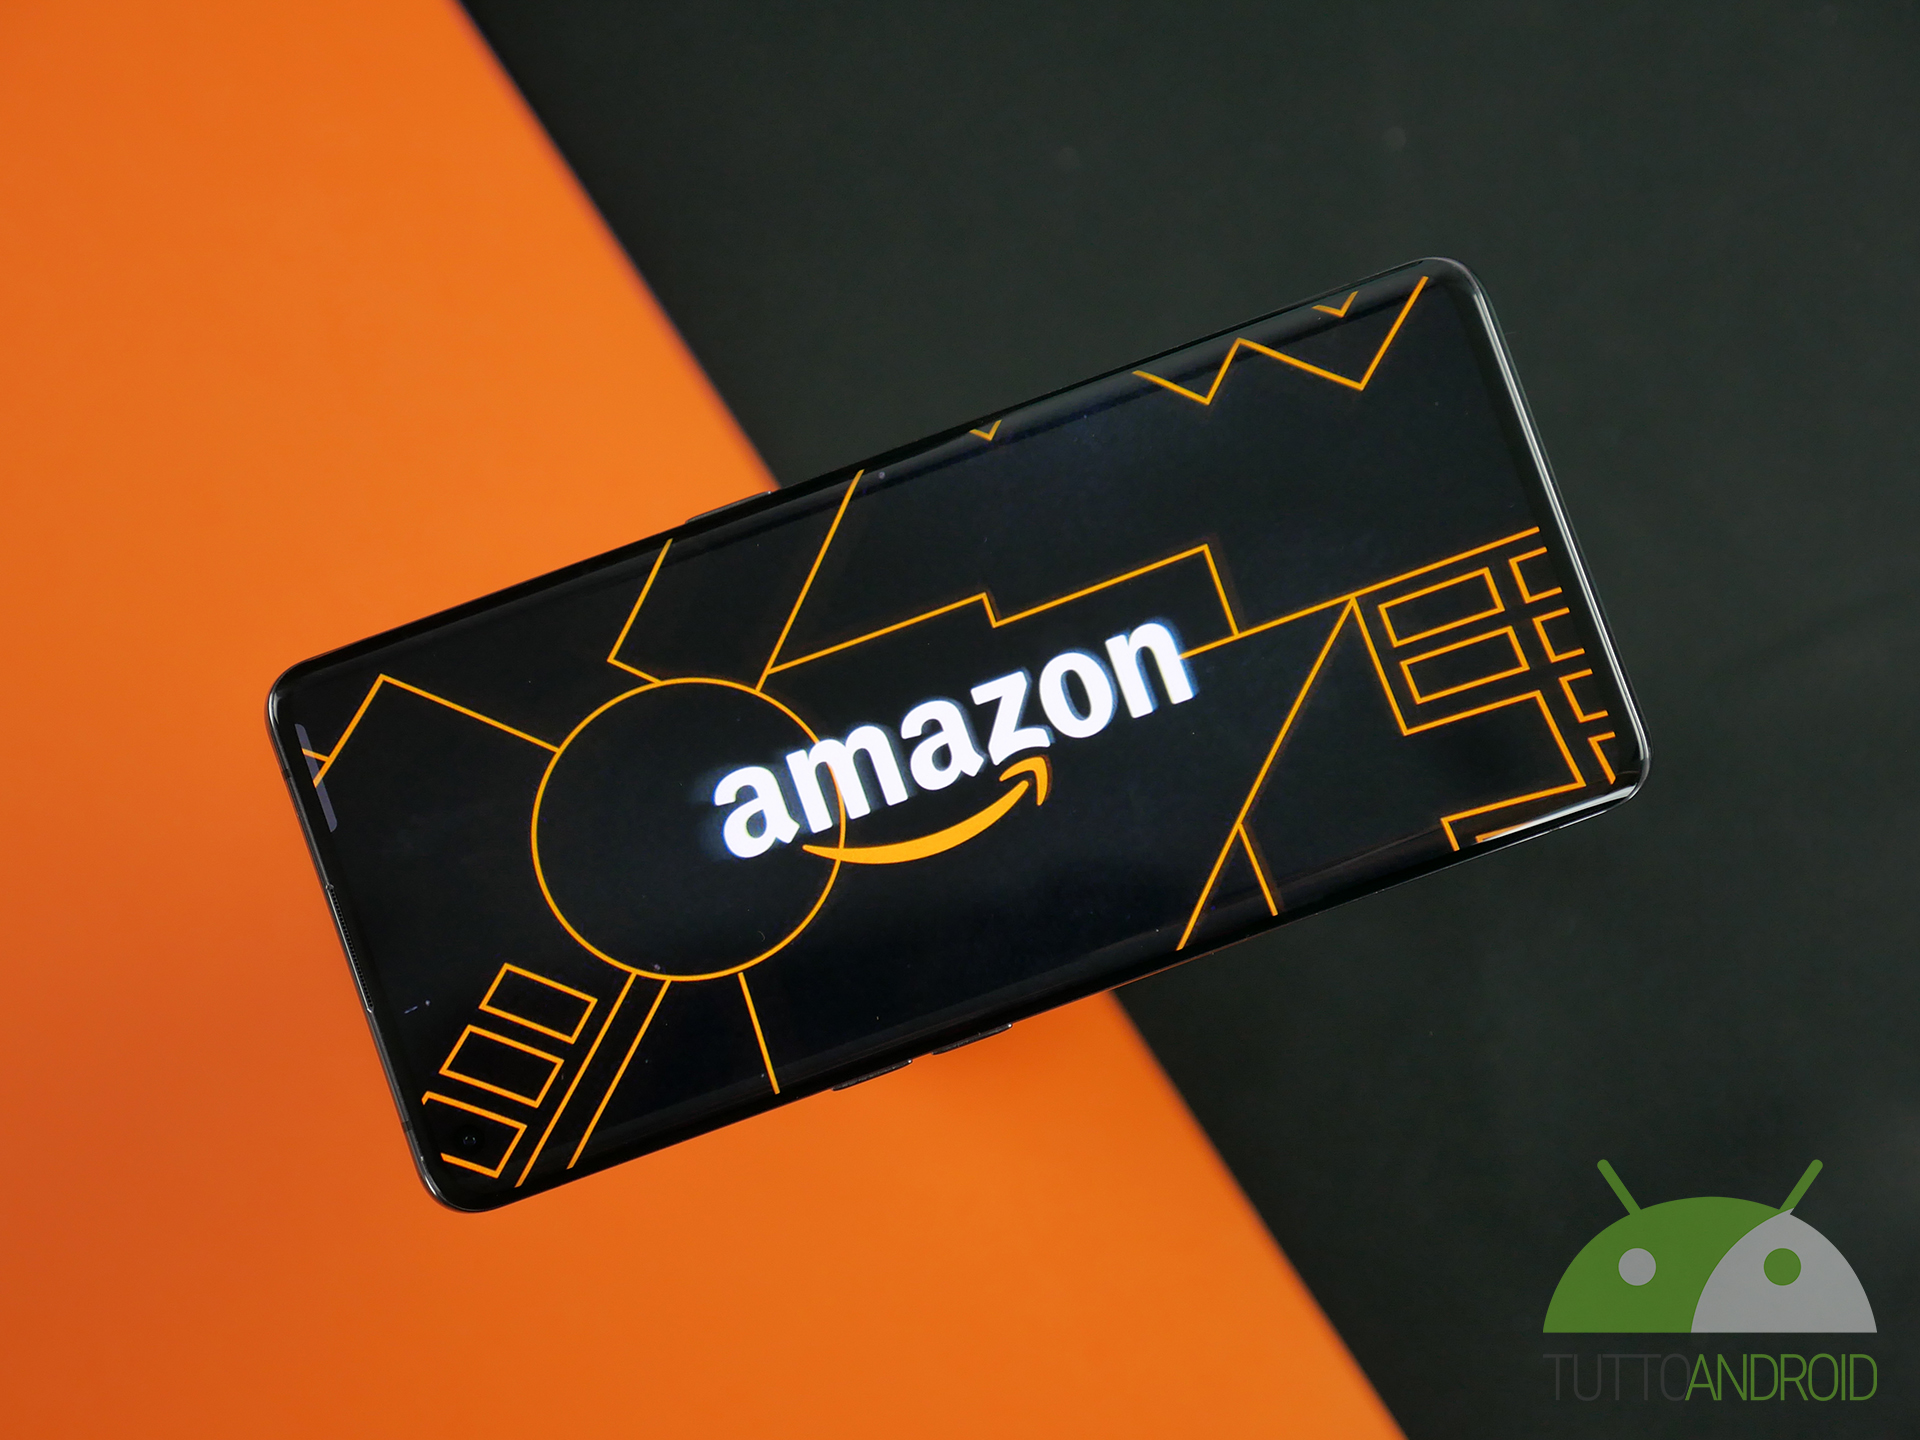 In view of Prime Day, Amazon is giving away another €6 discount voucher